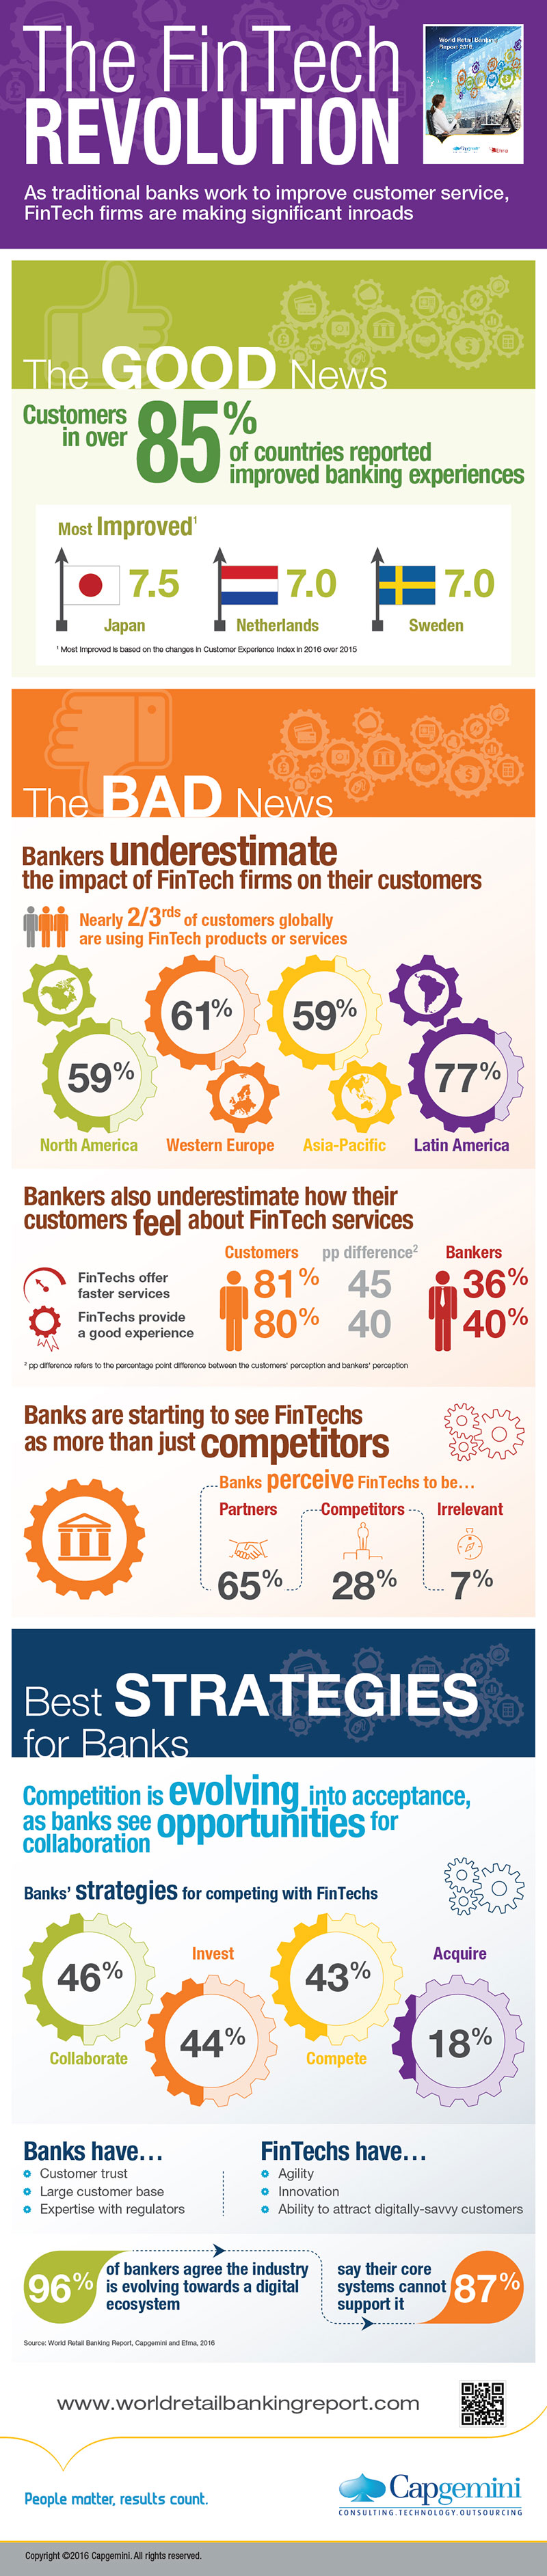 Infographic: The World Retail Banking Report